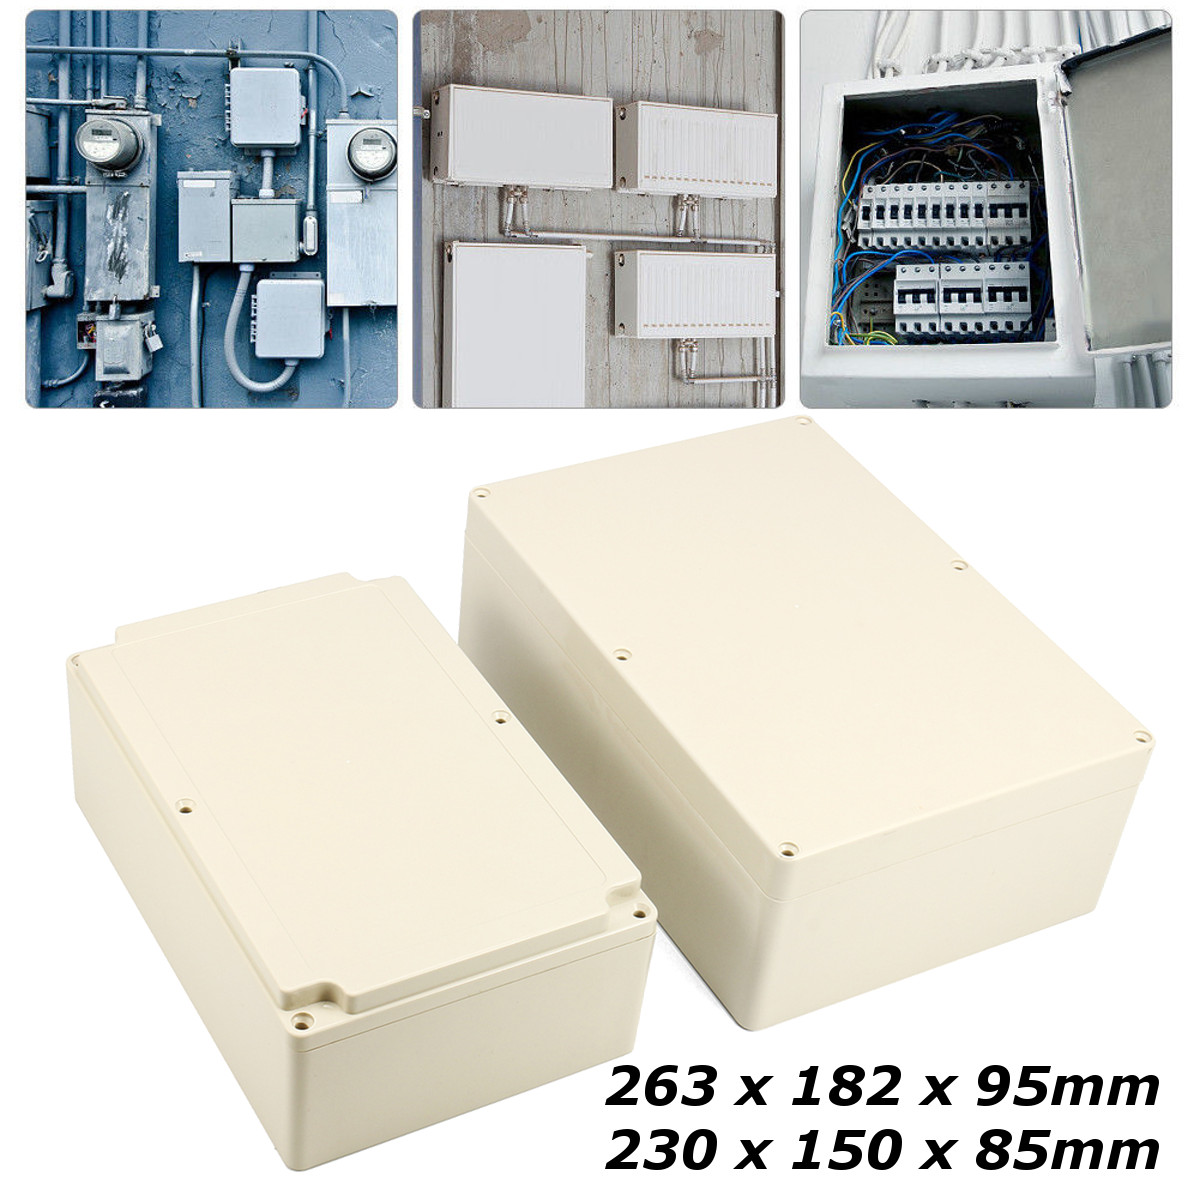 Waterproof-Plastic-Enclosure-Box-Electronic-Project-Instrument-Electrical-Junction-Case-Housing-DIY-1360531-1